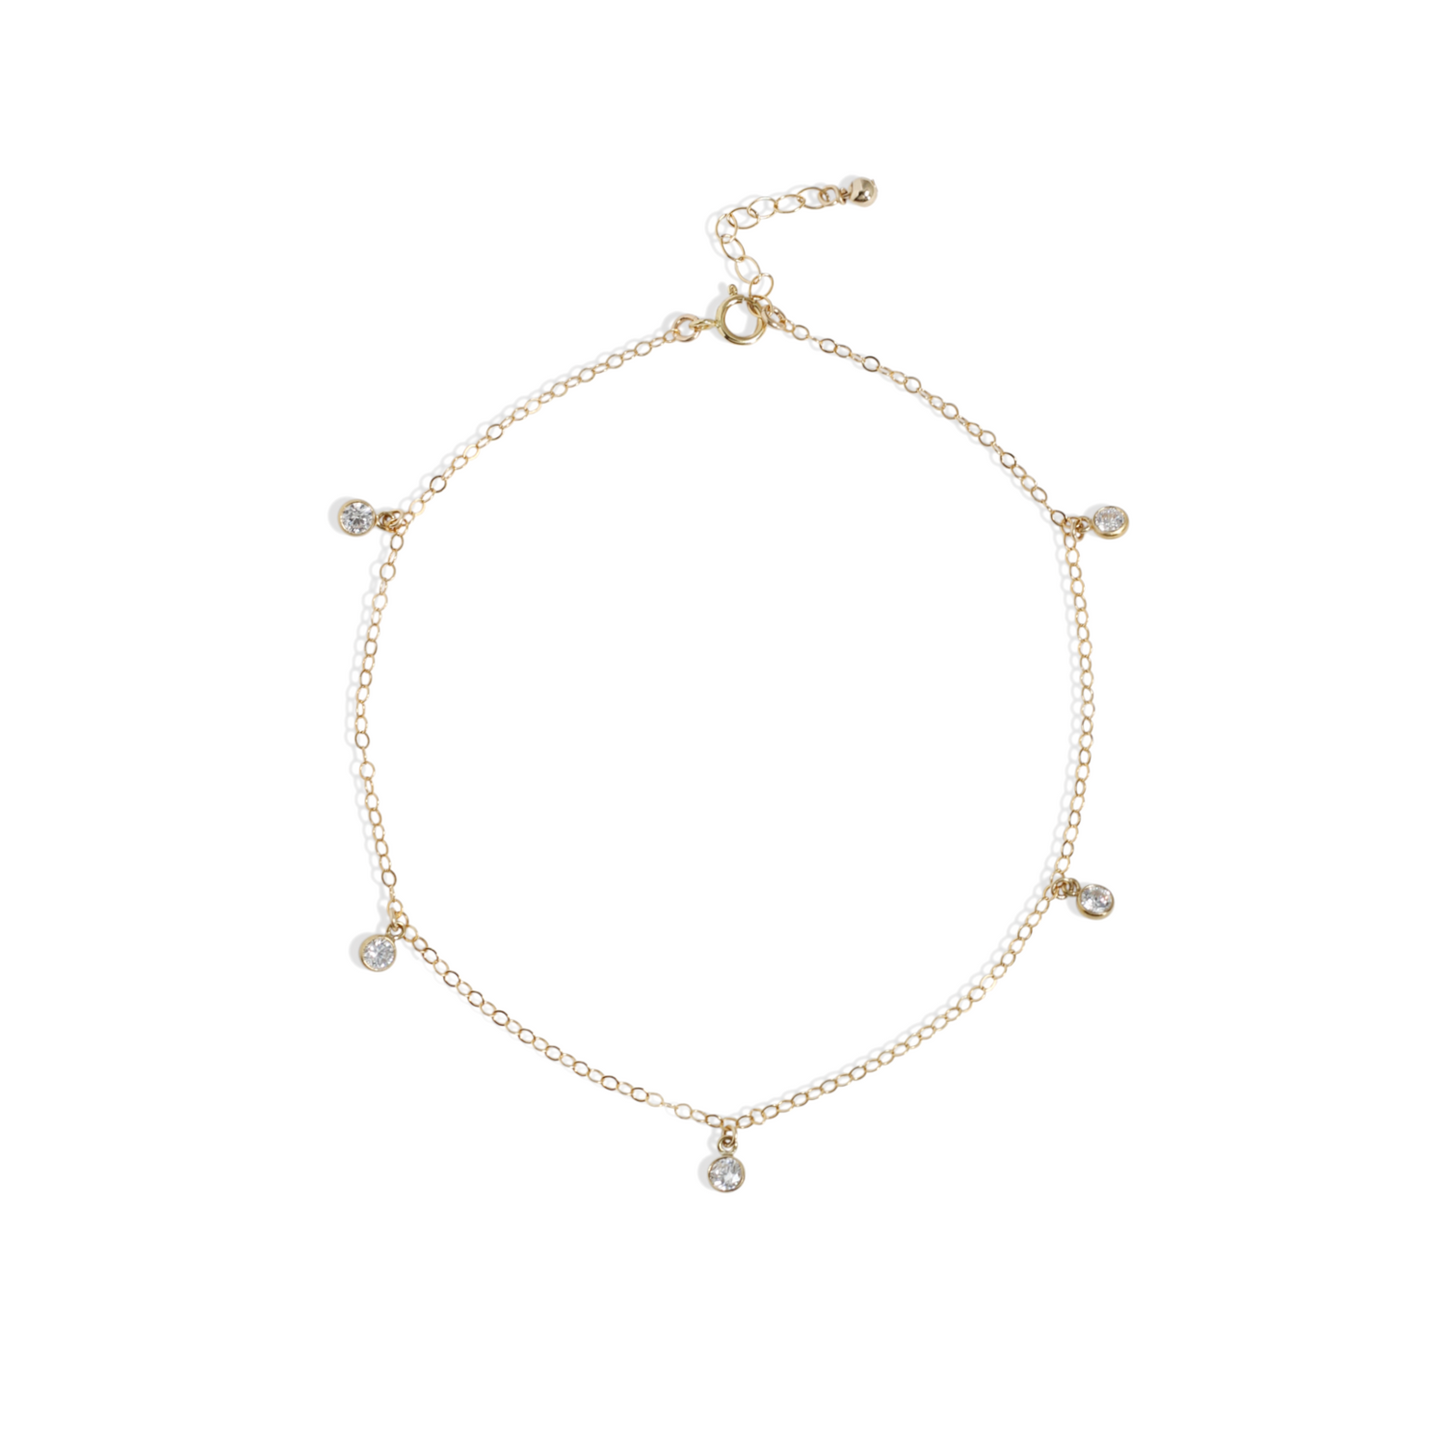 Crystal Drop Anklet - 14k Gold or Silver - The Smart Minimalist